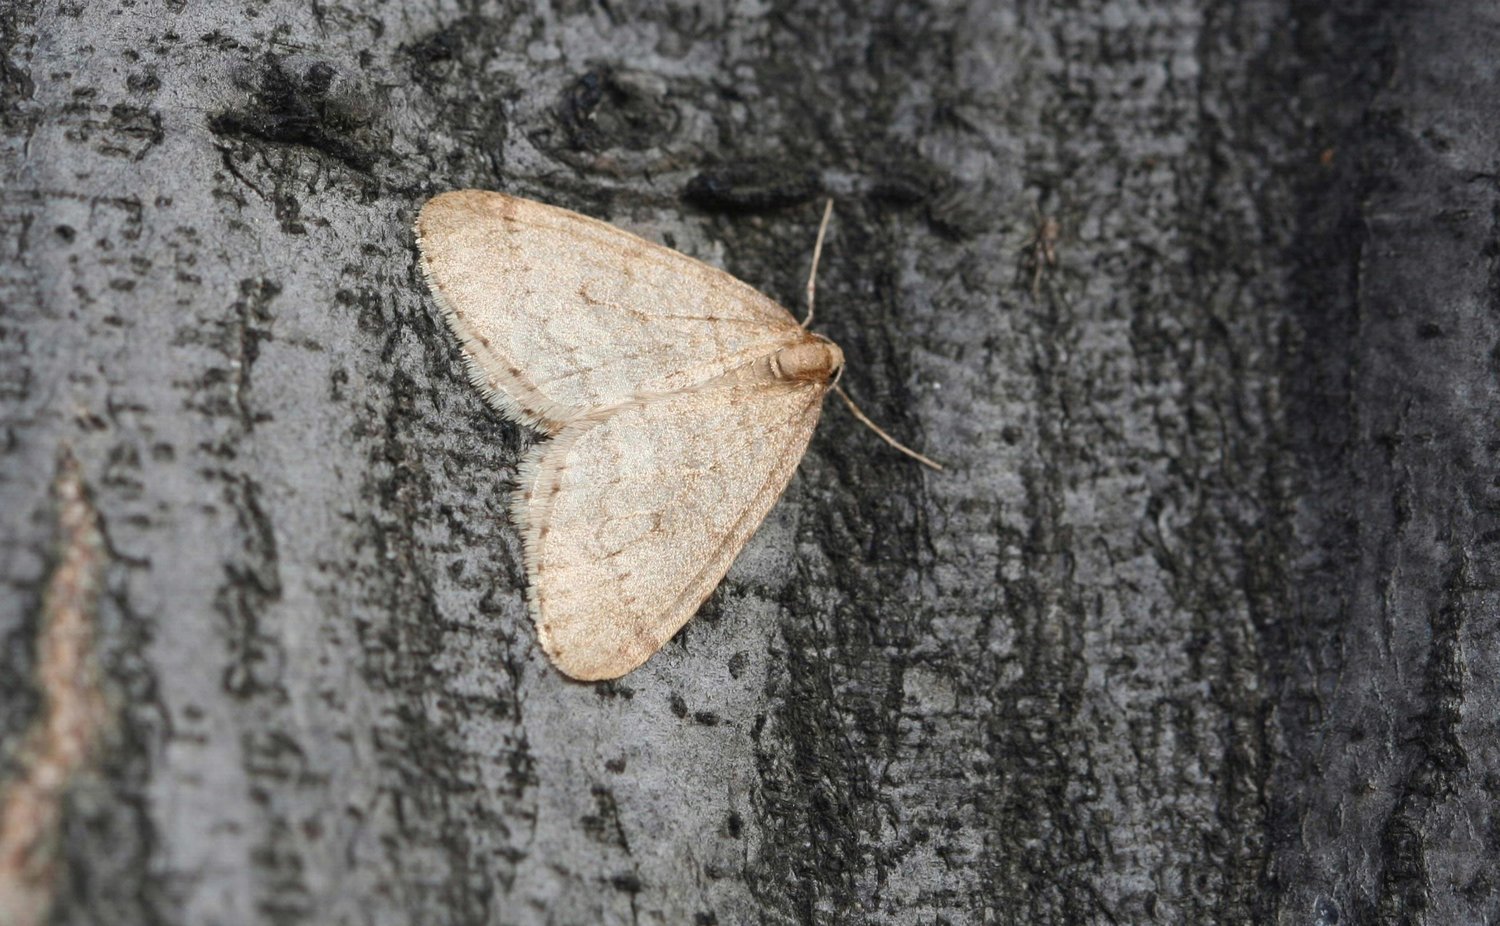 Winter moth adults emerge to mate in late fall through early winter.